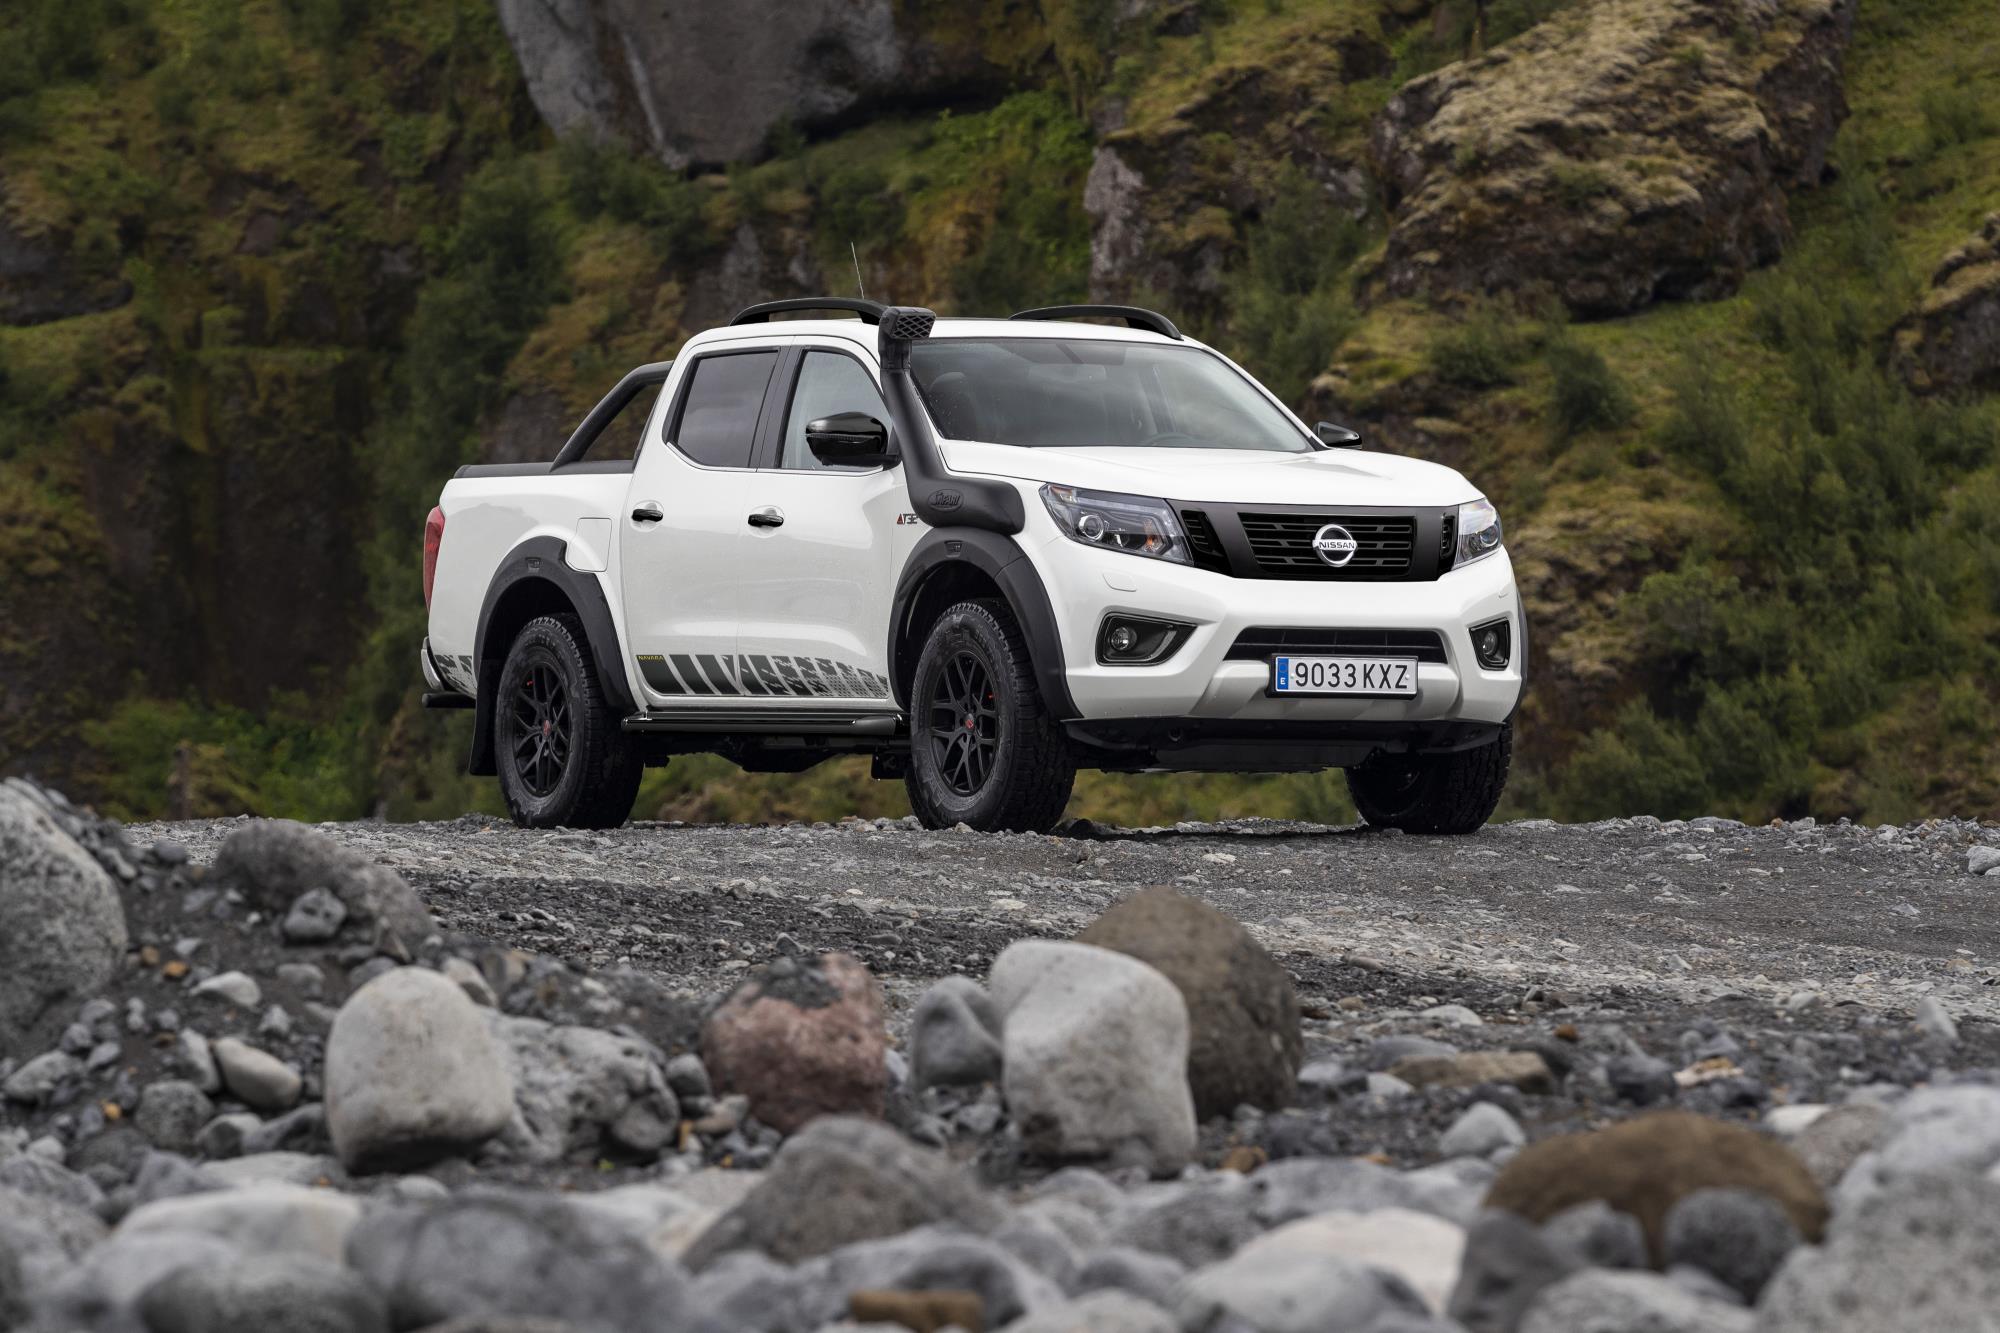 Nissan's new Navara AT32 is unveiled